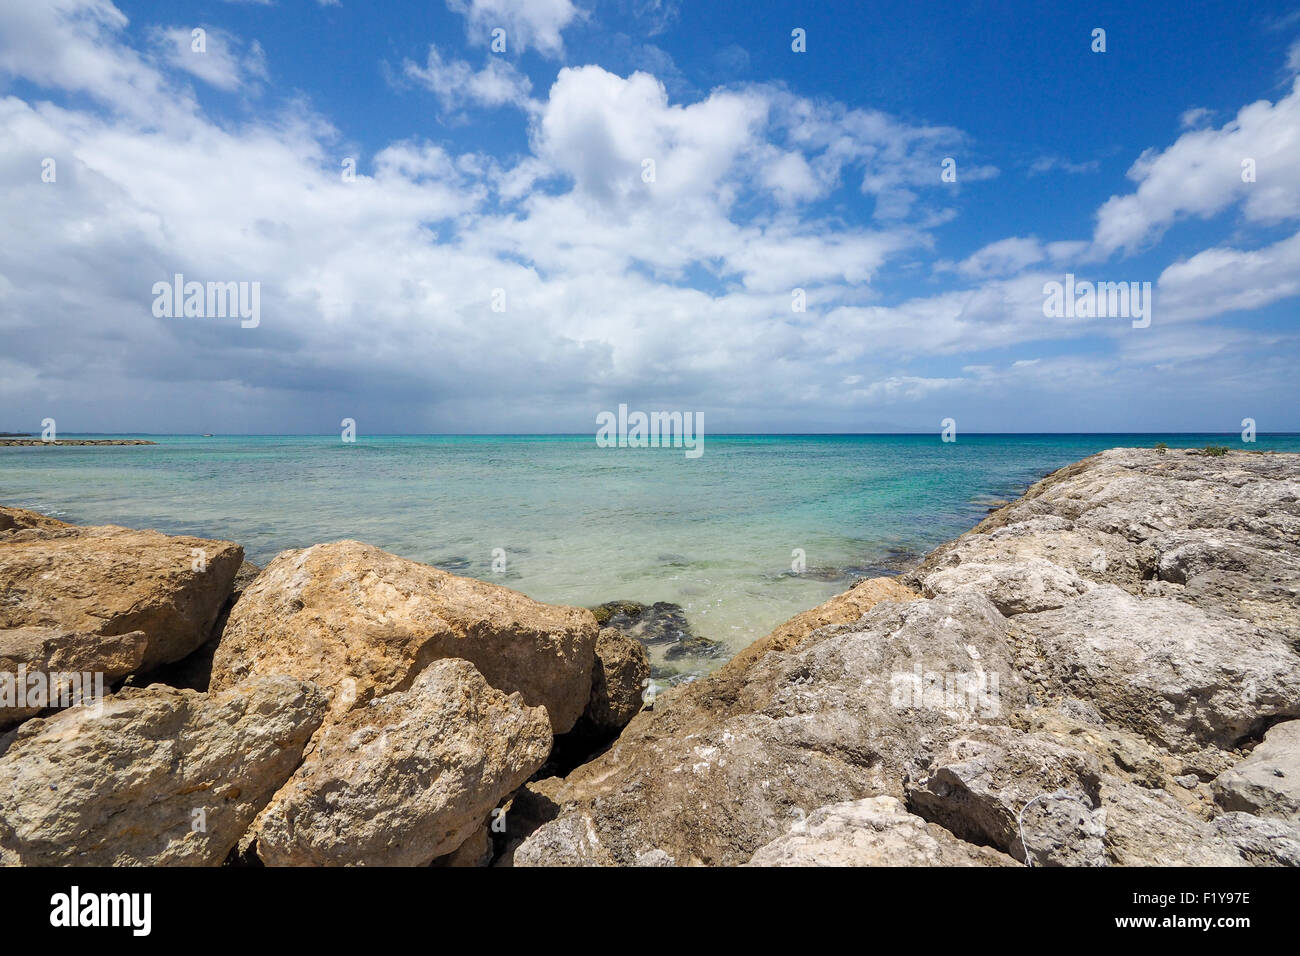 Sunny landscape, horizon over blue sea with lower rocks frame, Grande Terre, Guadeloupe, West Indies Stock Photo